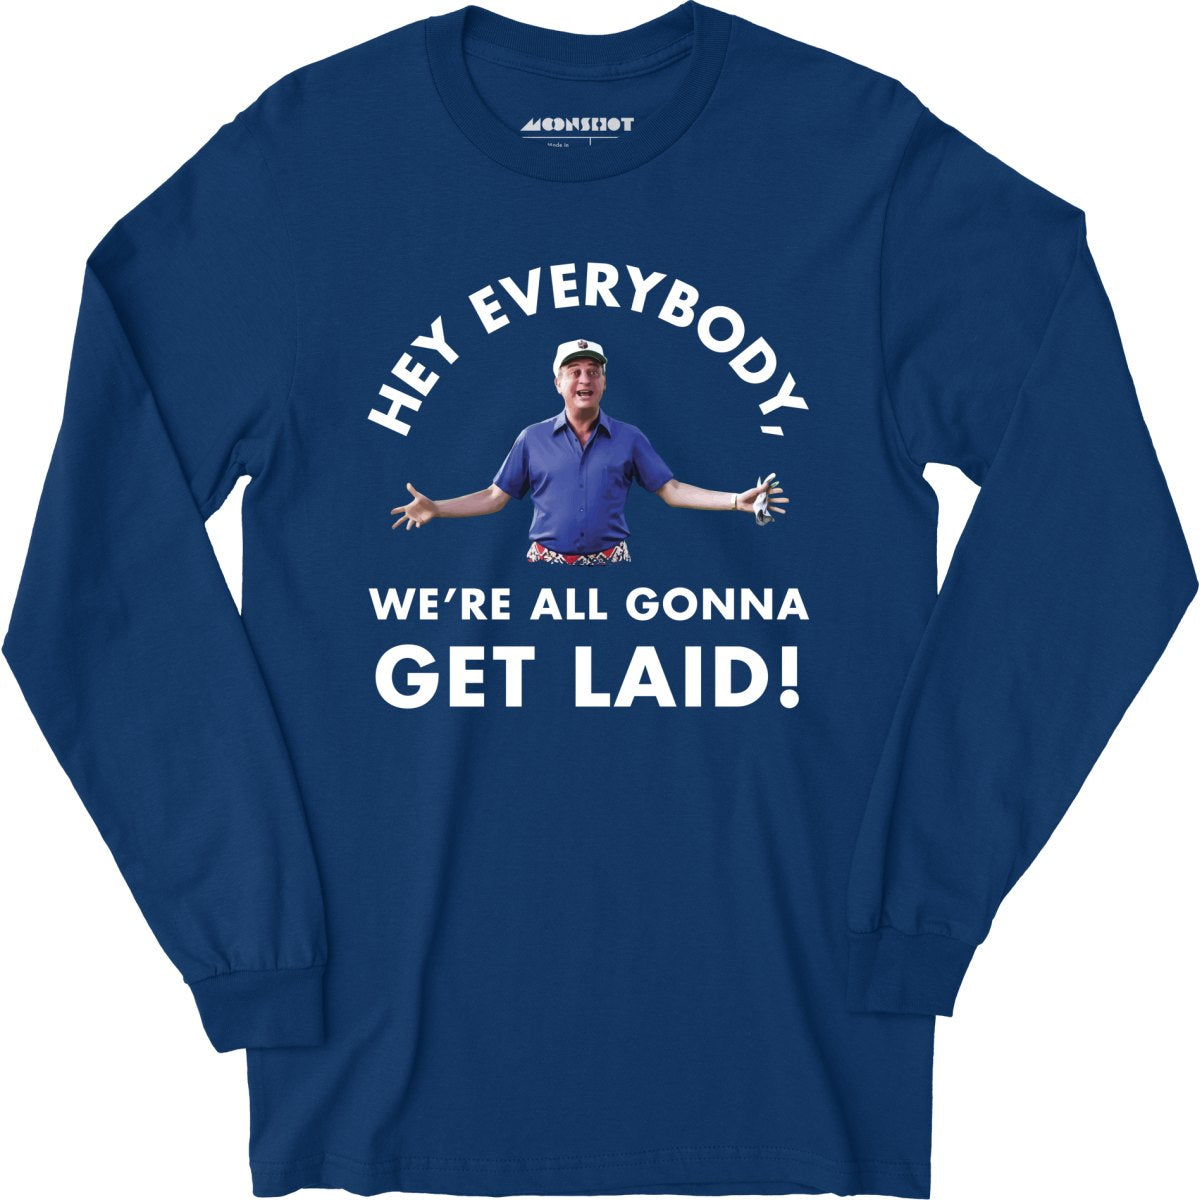 Hey Everybody, We're All Gonna Get Laid! - Long Sleeve T-Shirt